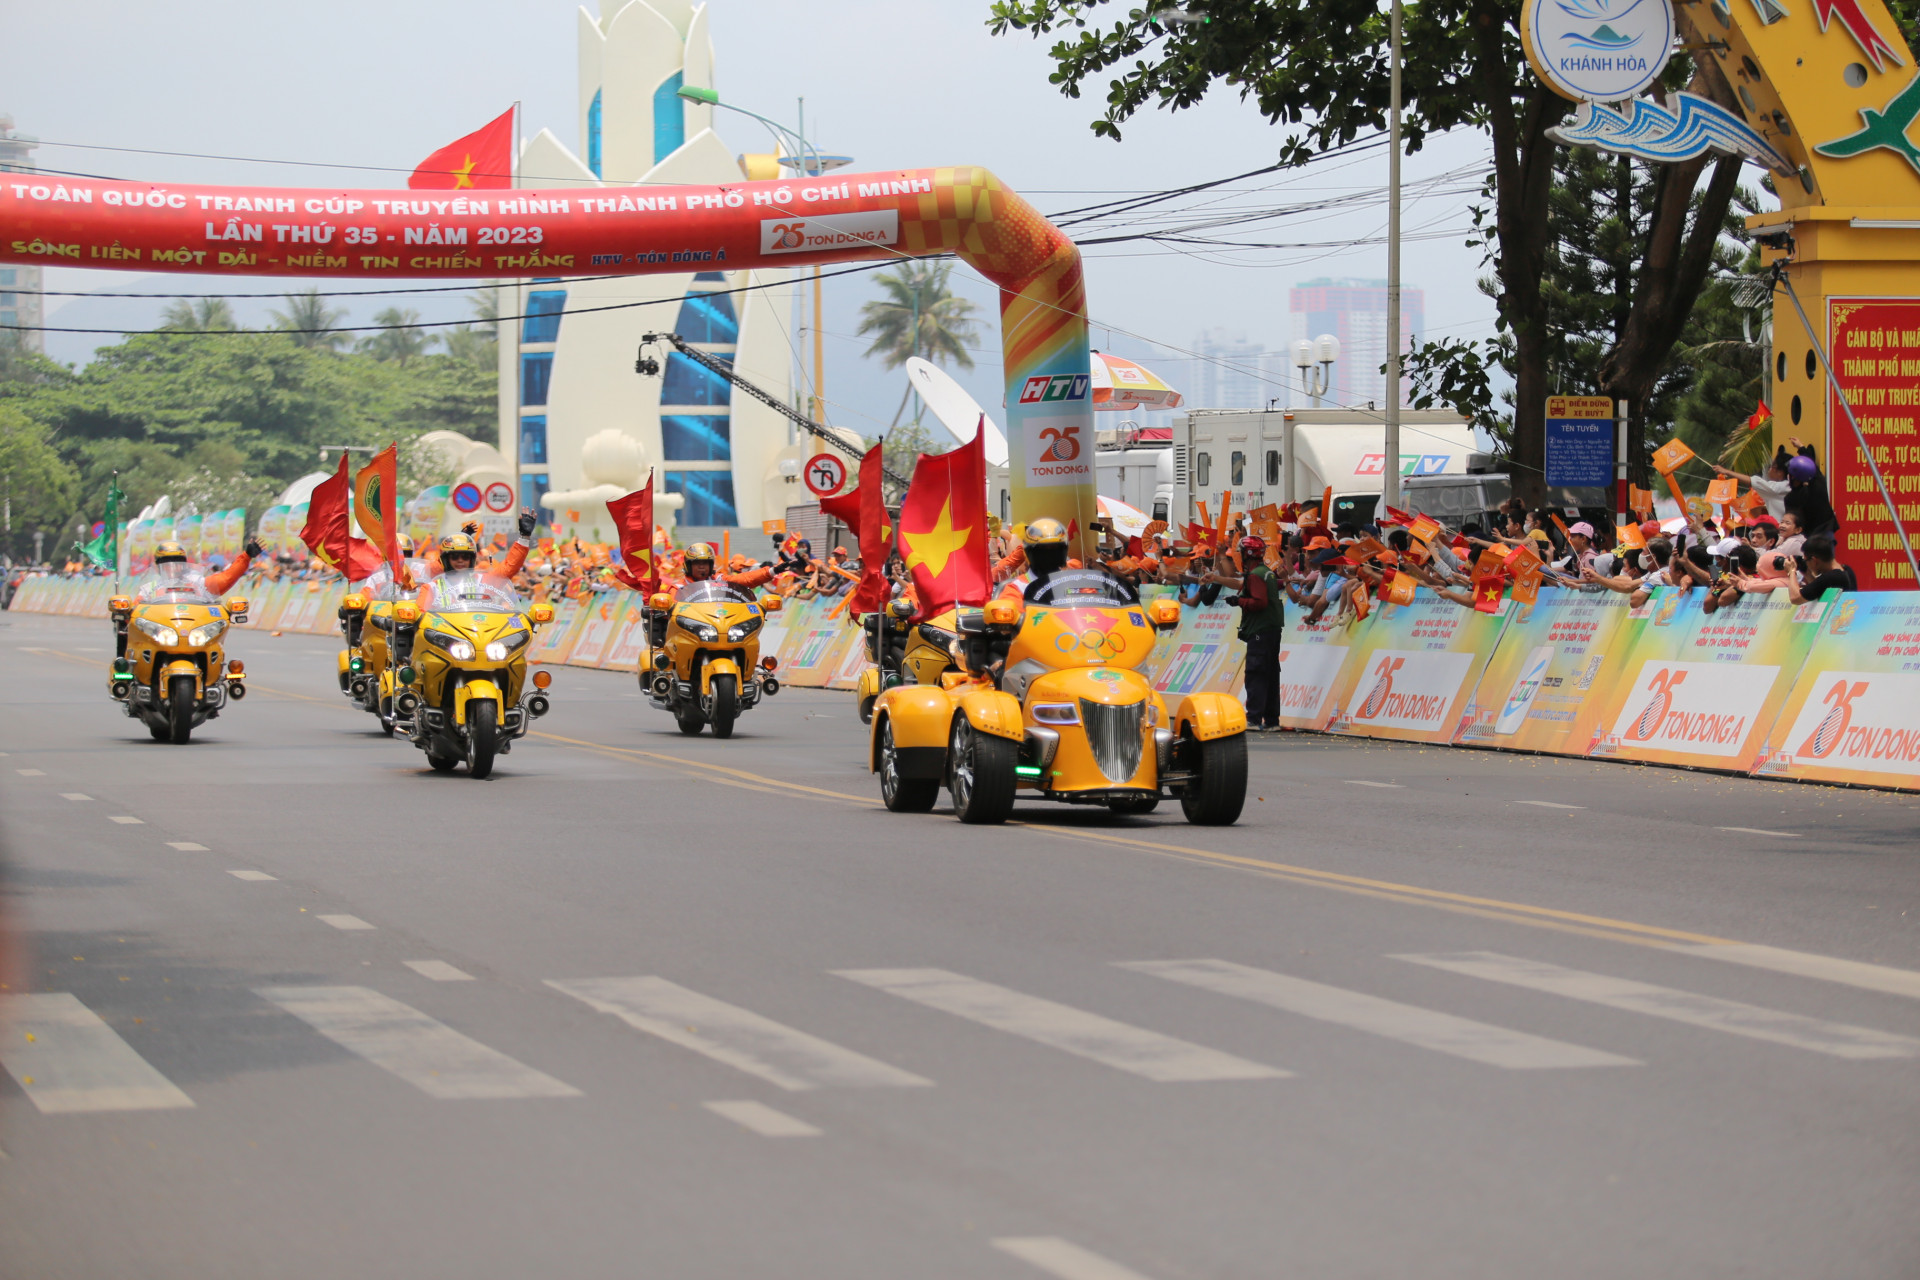 Nha Trang was one of the locations of Ho Chi Minh City television national cycling race 2023

